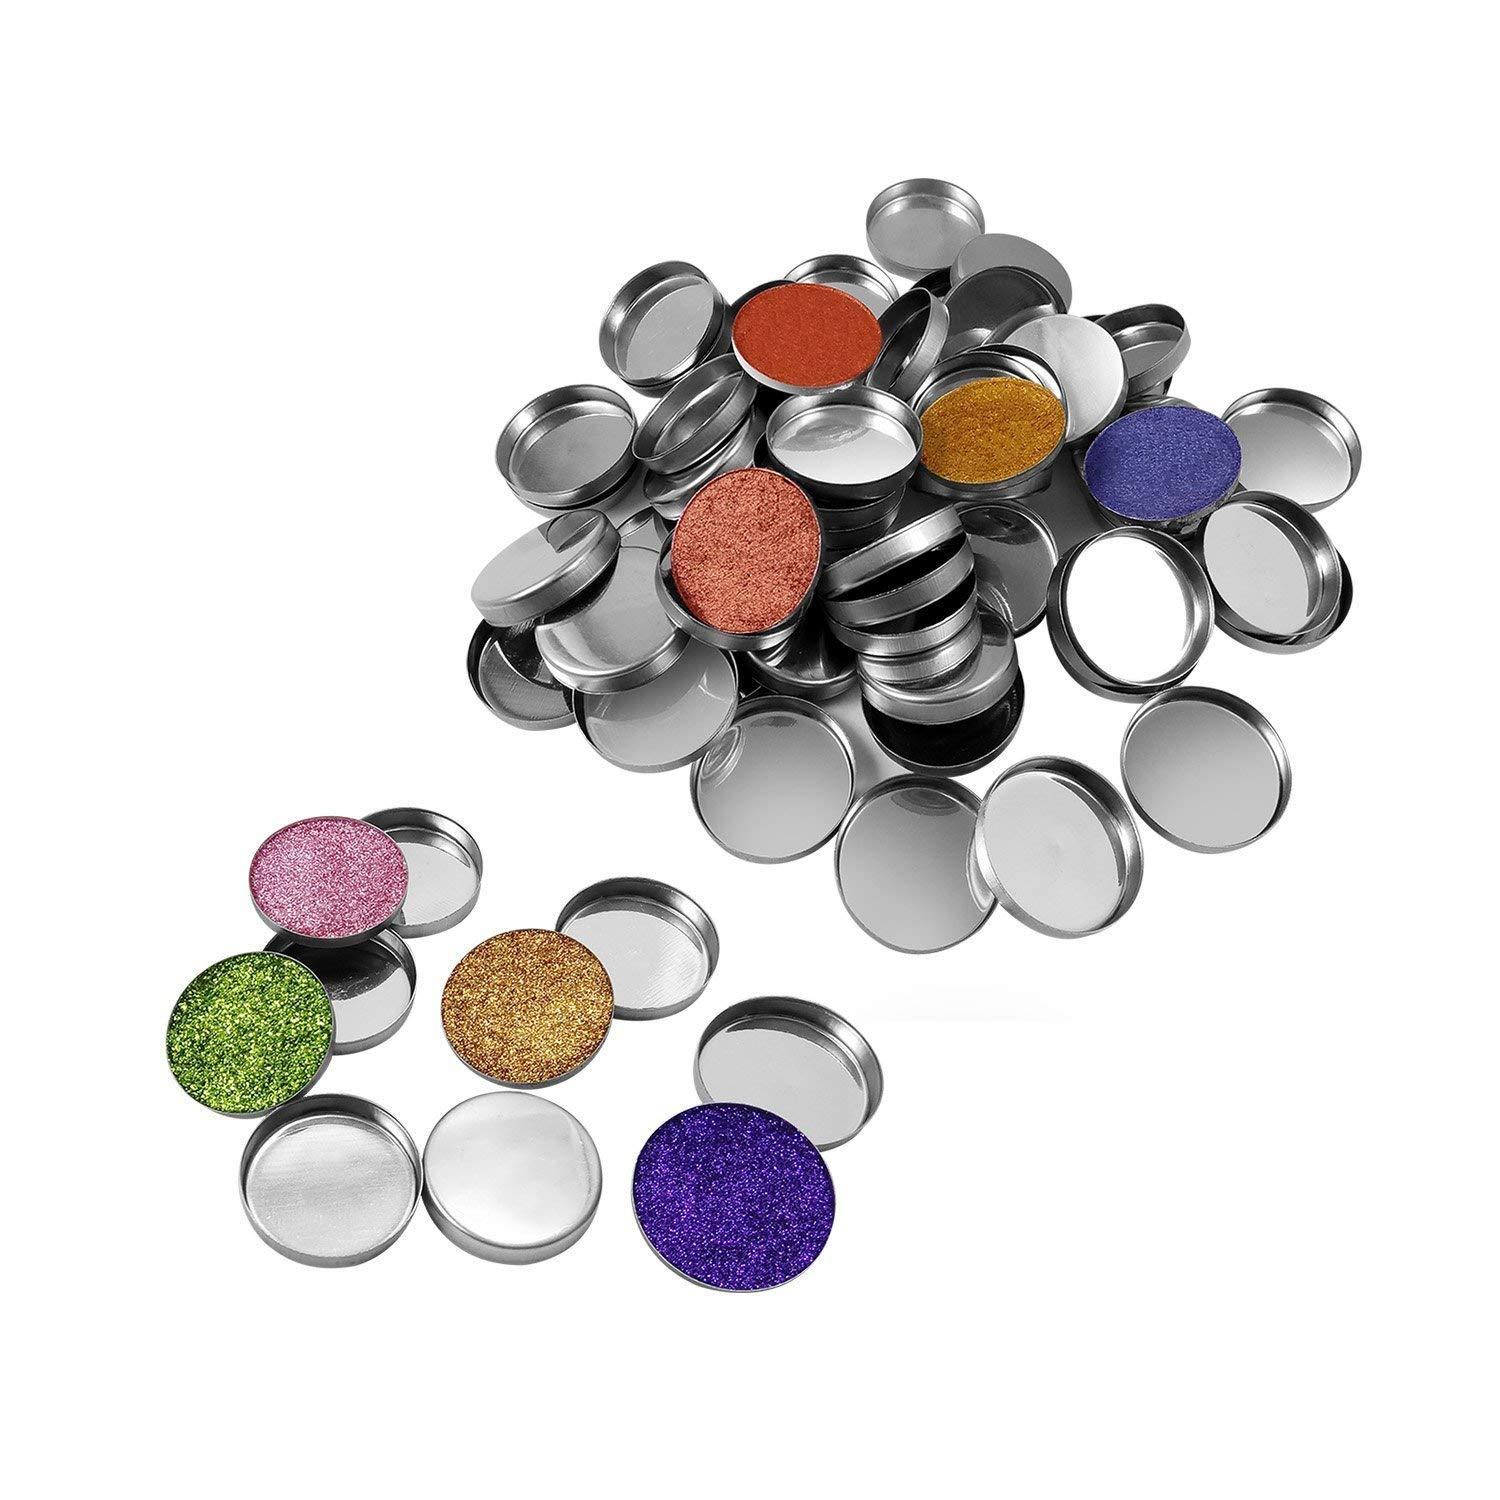 Allwon 56 Pack Empty Round Metal Pans Size 26mm for Eyeshadow Palette  Magnetic Makeup Palette (Height 3.5 mm)